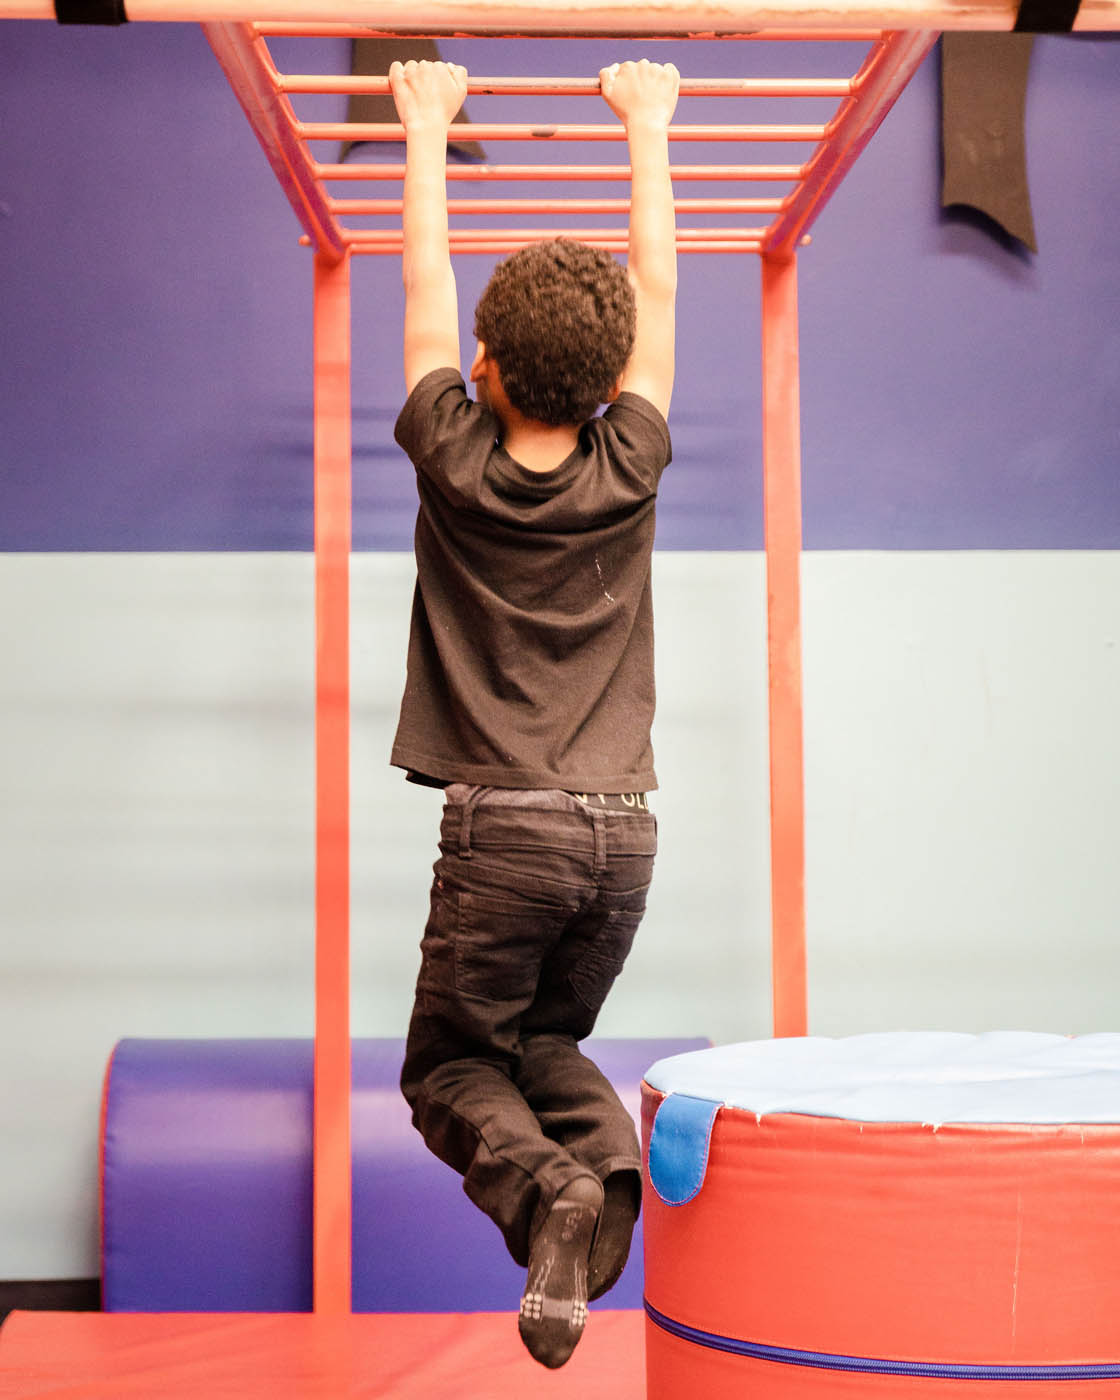 A little boy hanging on monkey bars, contact us today about our baby groups in Wethersfield, CT.